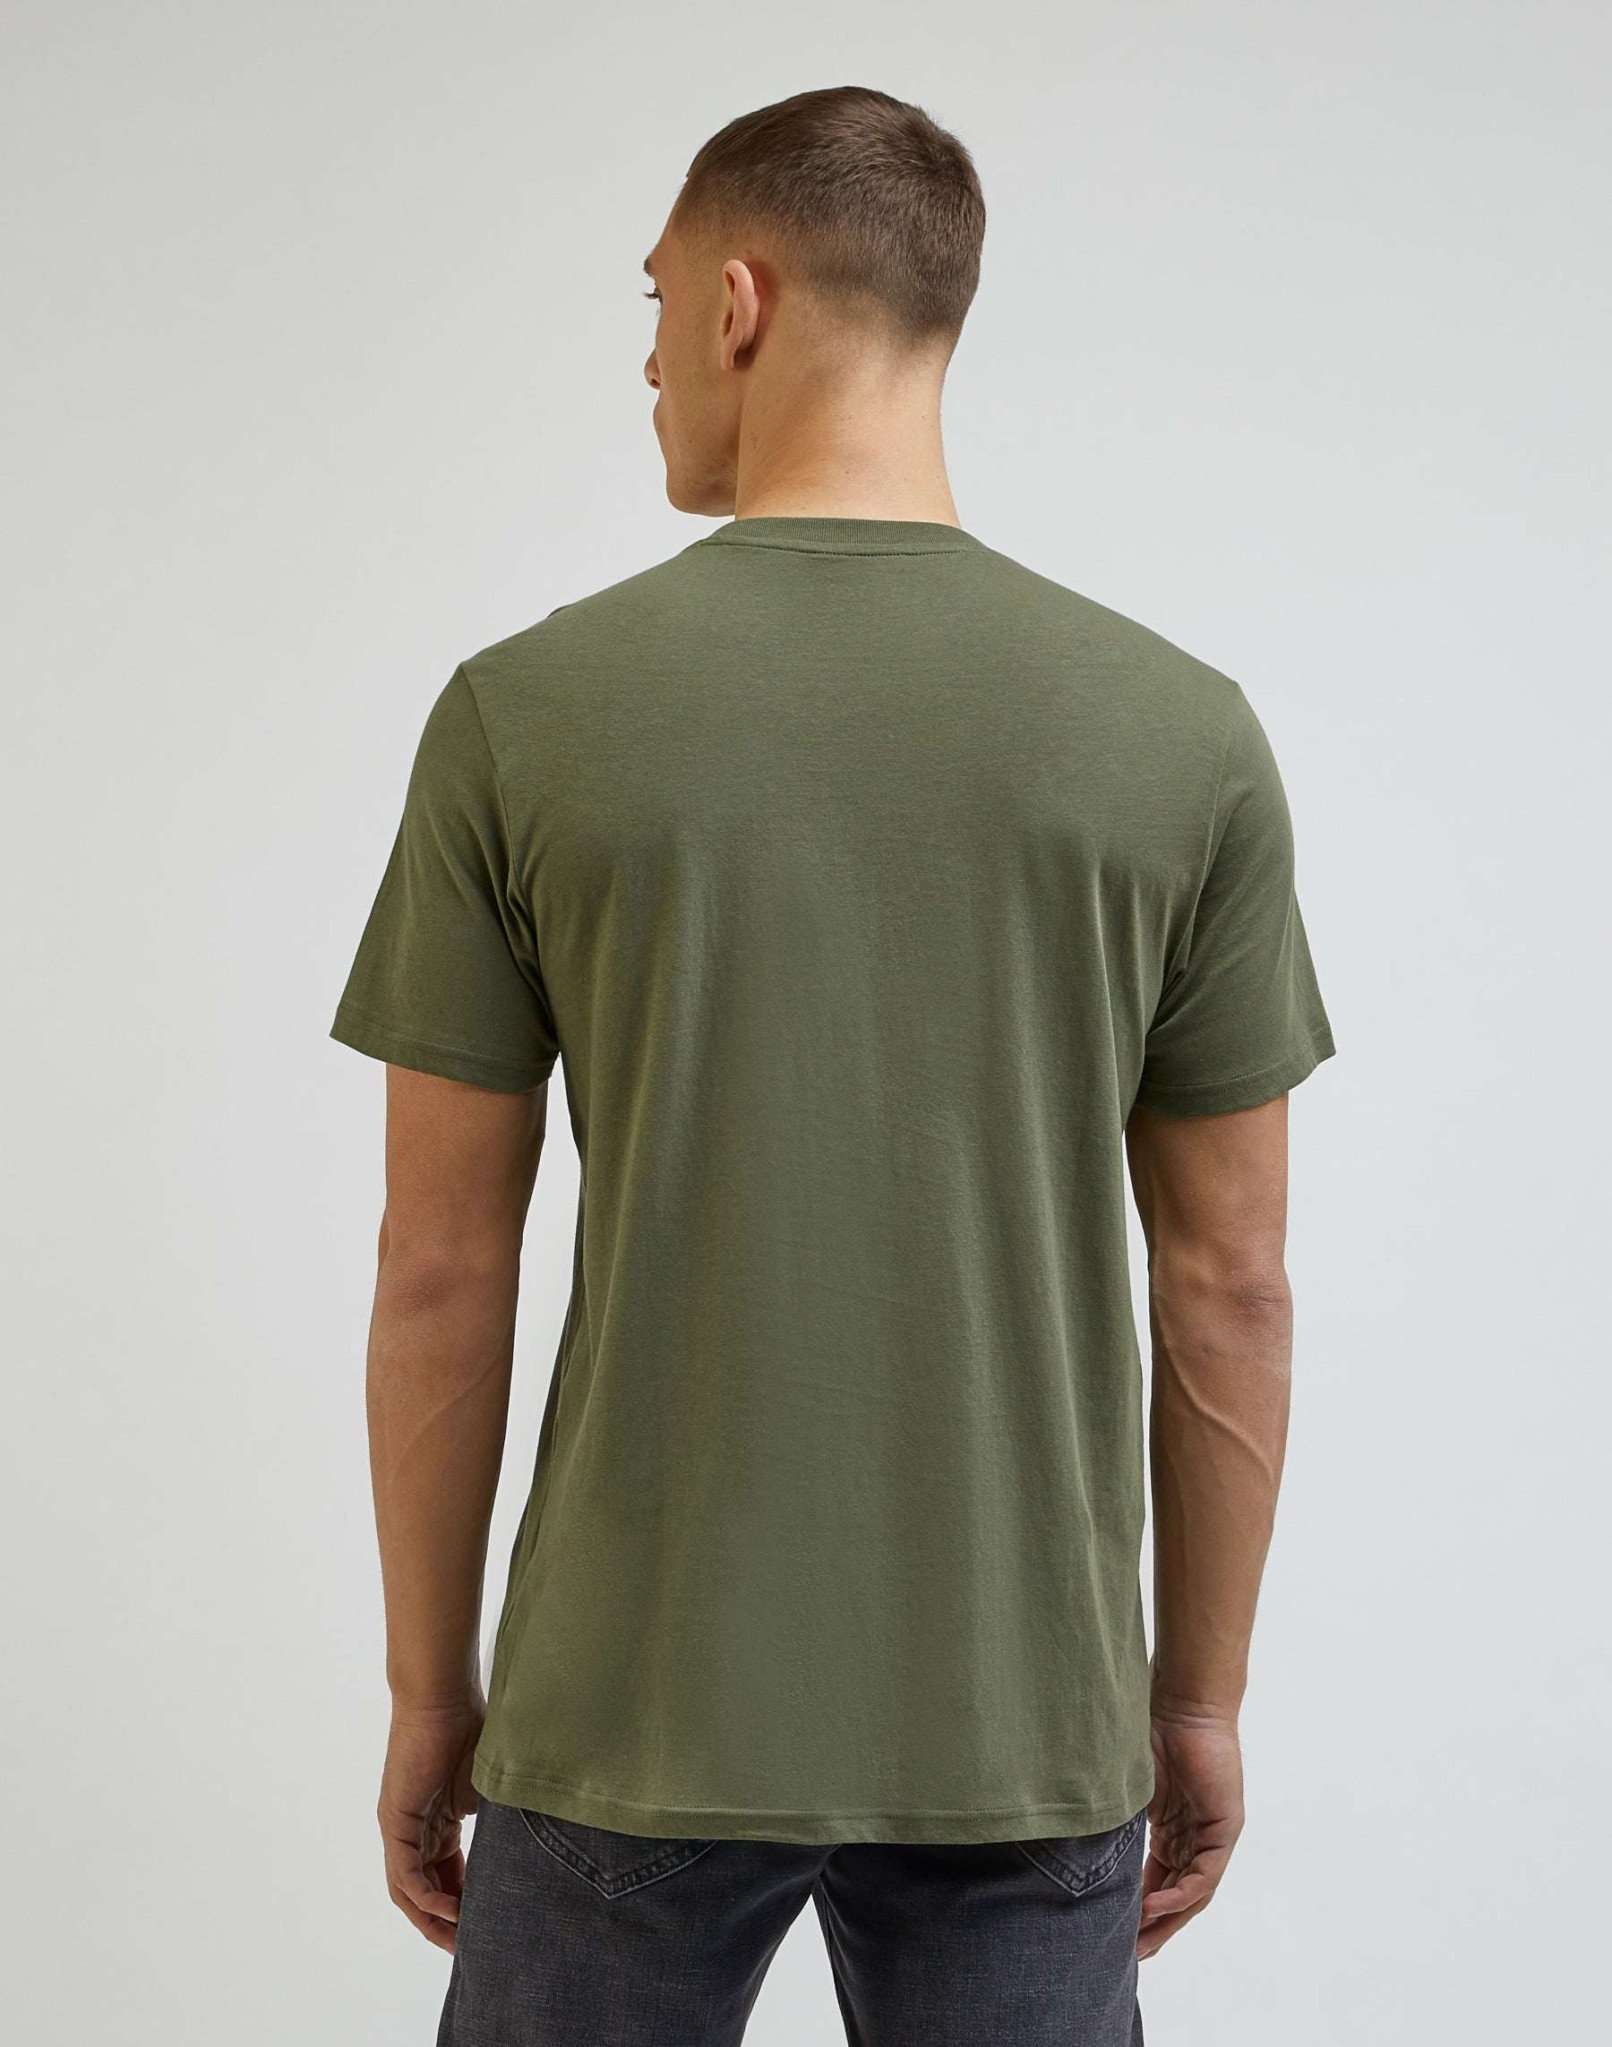 Medium Wobbly Lee Tee in Olive Grove T-Shirts Lee   